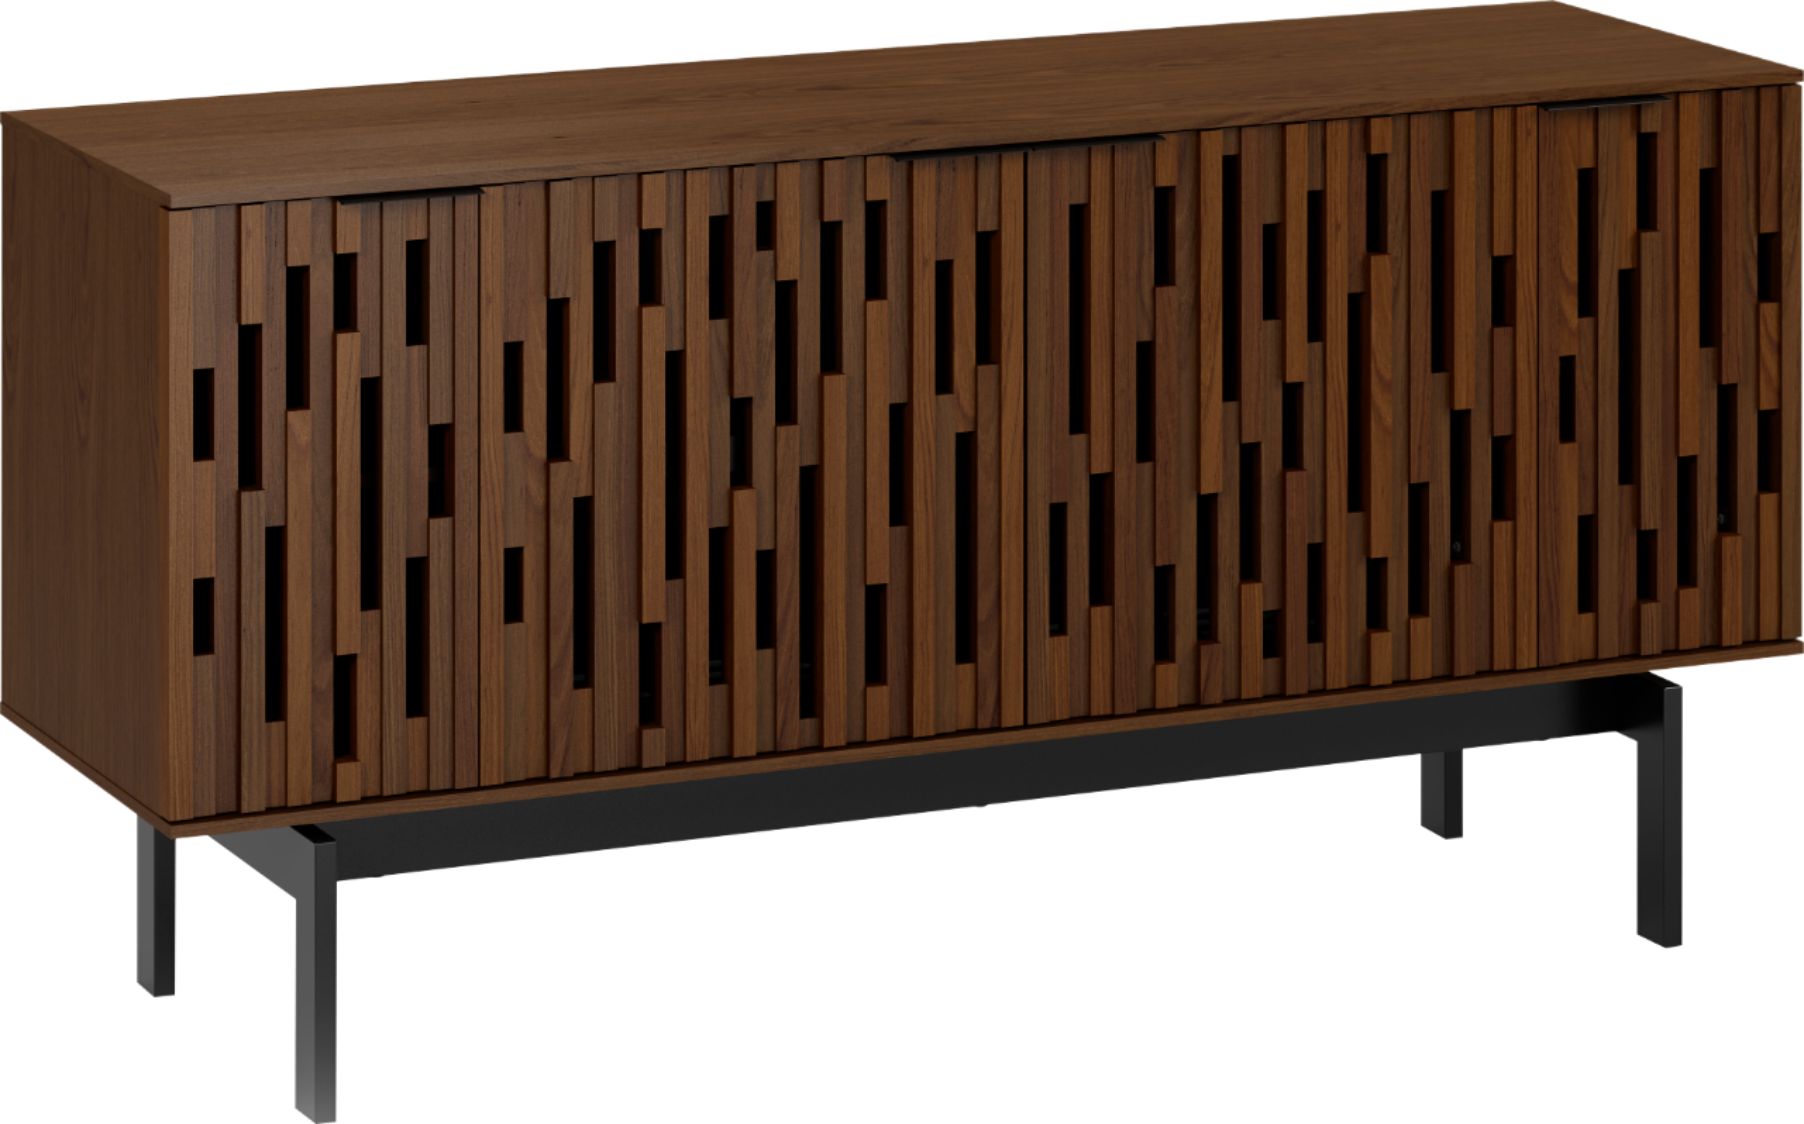 Angle View: BDI - Corridor TV Cabinet for Most Flat-Panel TVs Up to 80" - Chocolate Stained Walnut